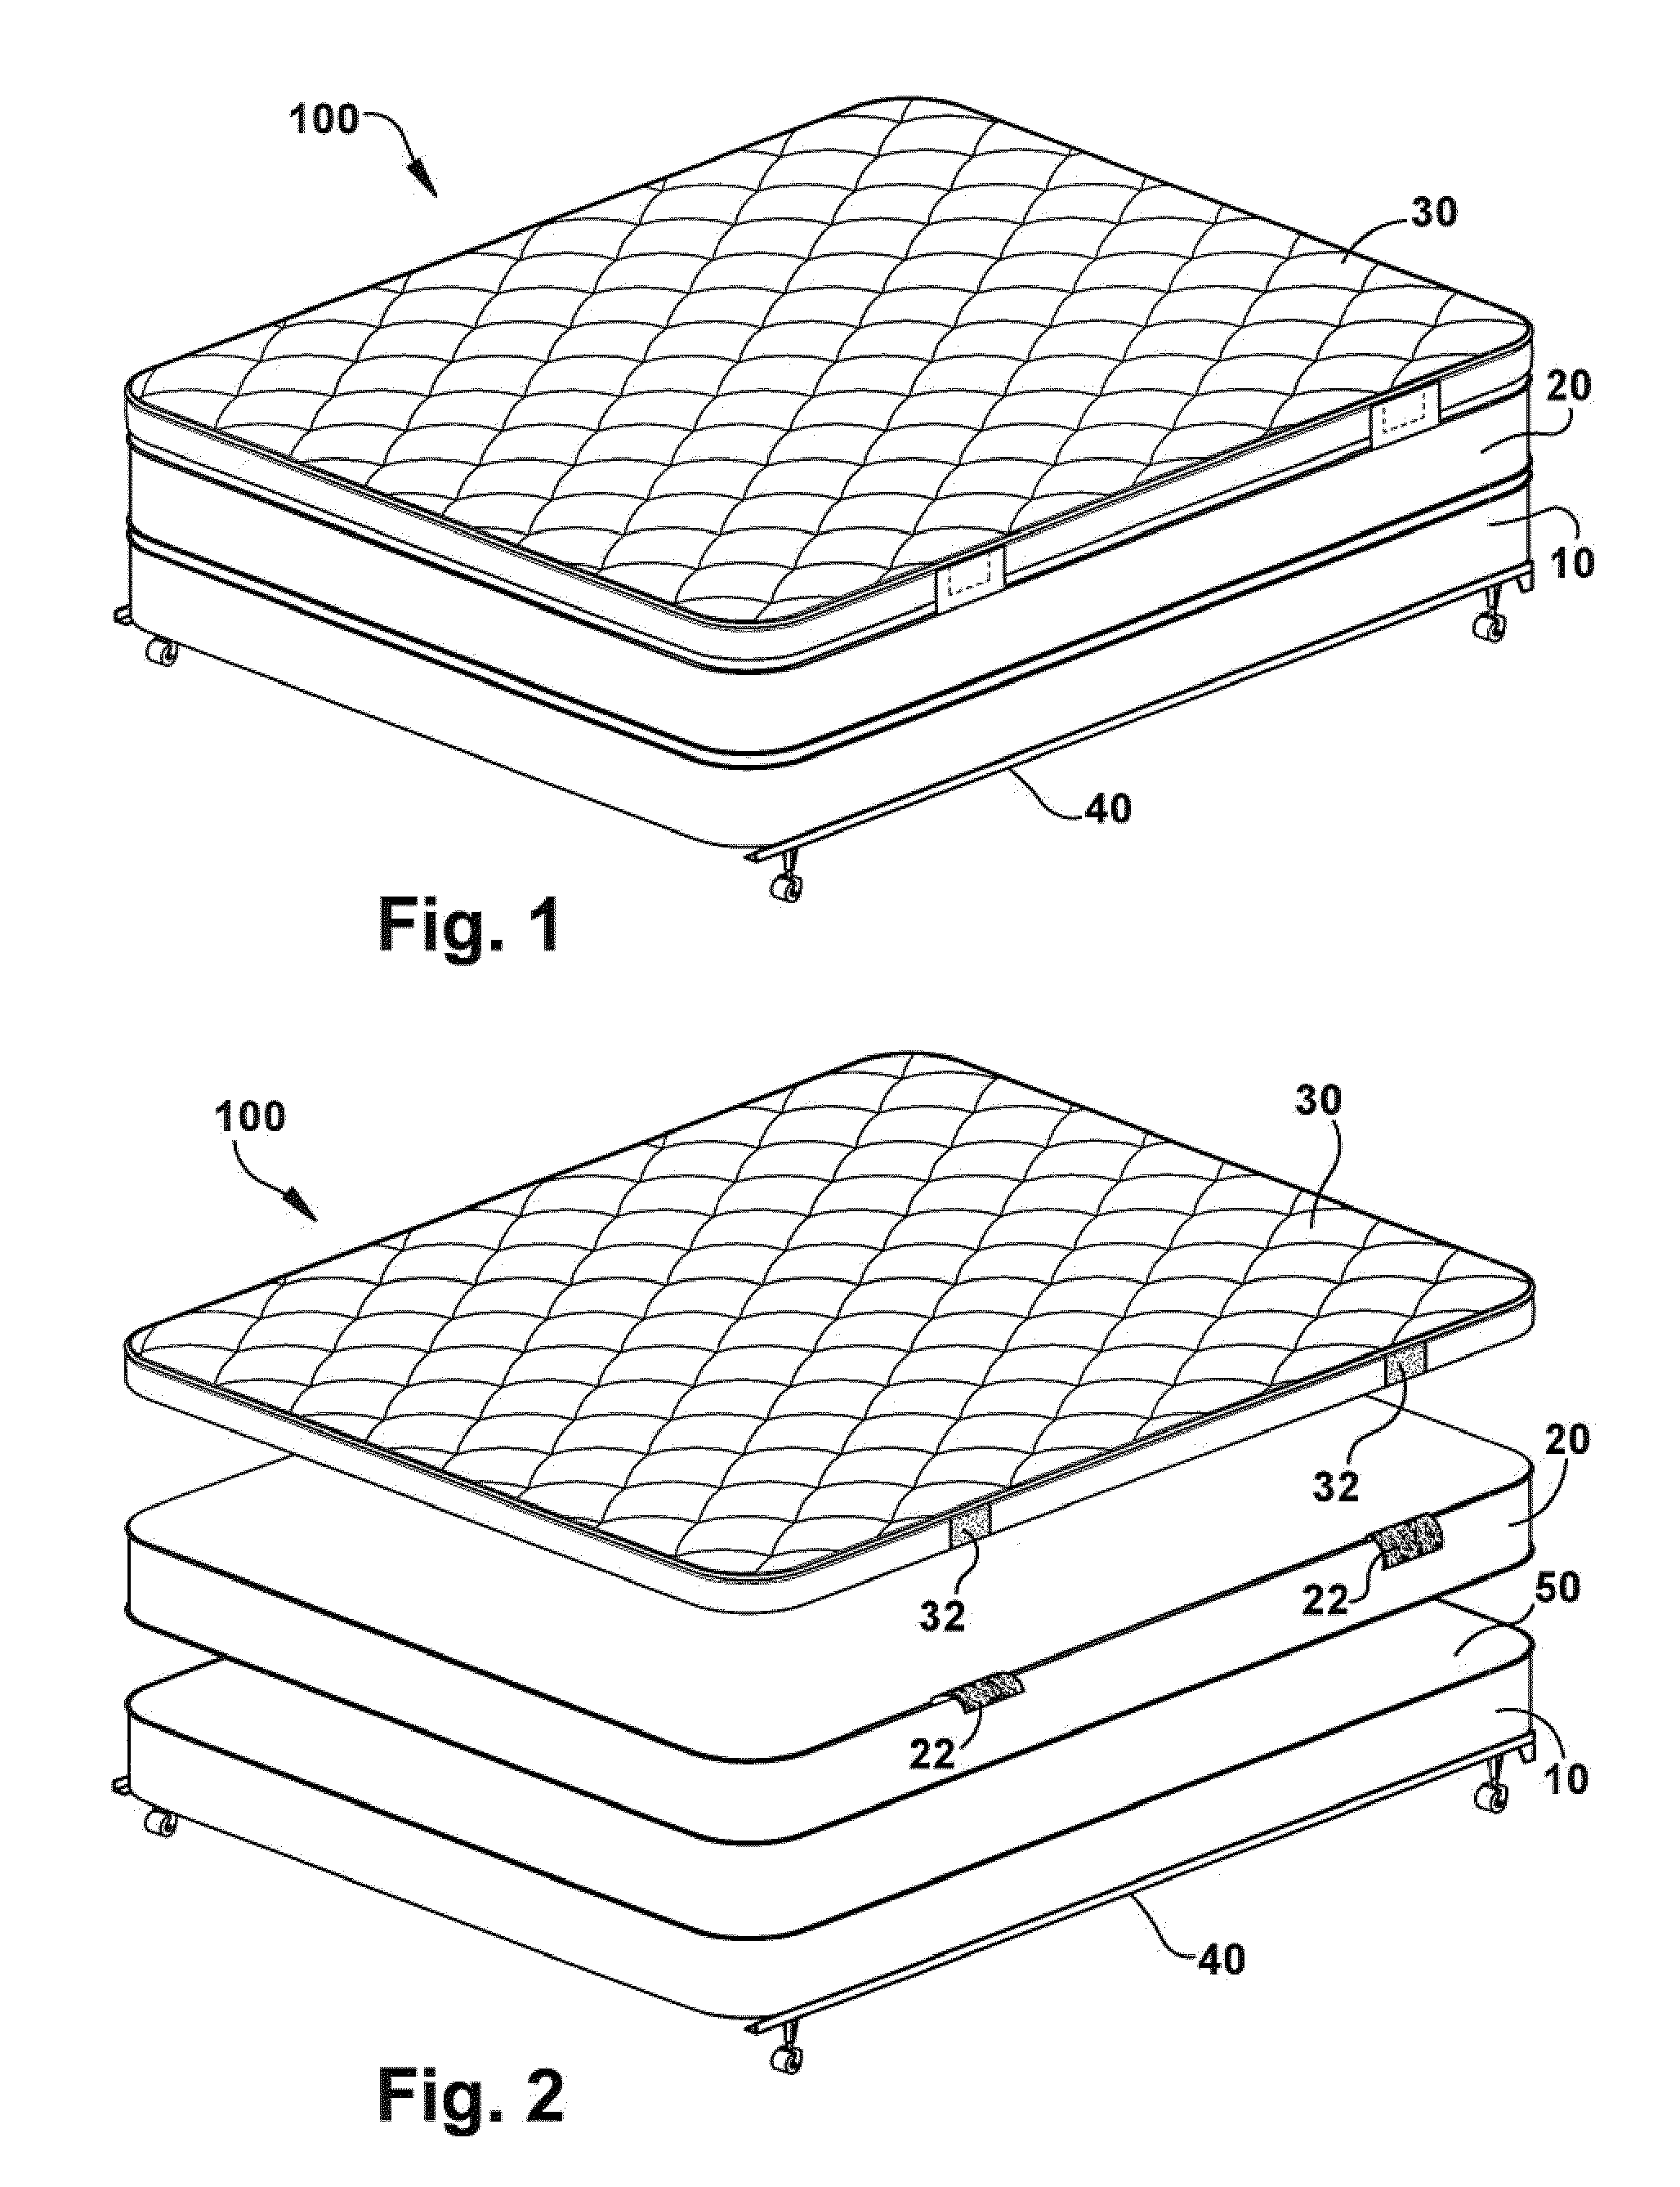 Mattress assembly with convertible topper